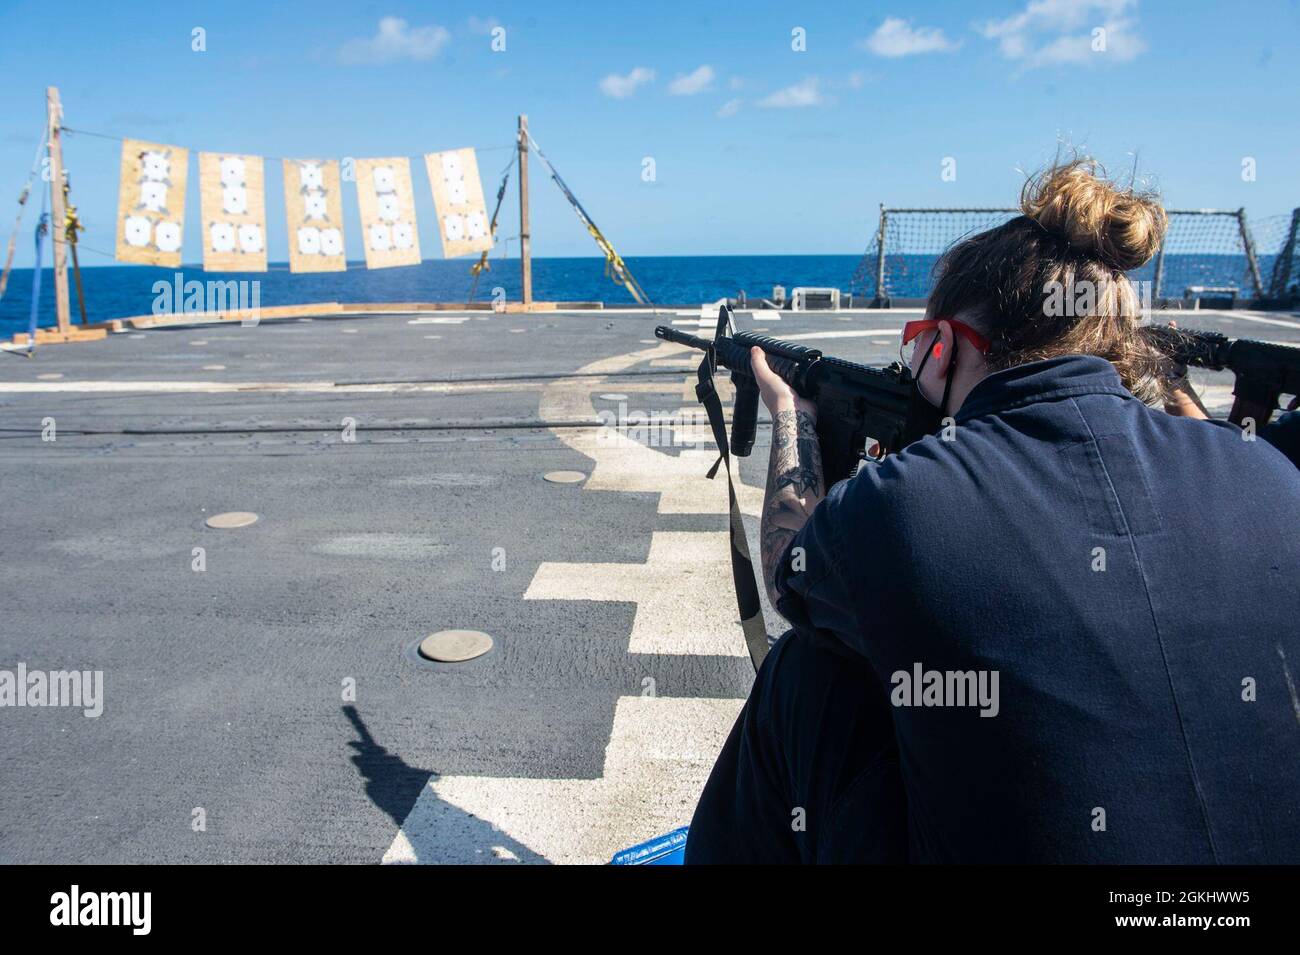 210427-N-RG587-1040 ATLANTIC OCEAN (April 27, 2021) Boatswain's Mate 3rd Class Rayna Woods, from Las Vegas, participates in a rifle qualification course aboard the Ticonderoga-class guided-missile cruiser USS Vella Gulf (CG 72), April 27, 2021. Vella Gulf is operating in the Atlantic Ocean in support of naval operations to maintain maritime stability and security in order to ensure access, deter aggression and defend U.S., allied and partner interests. Stock Photo